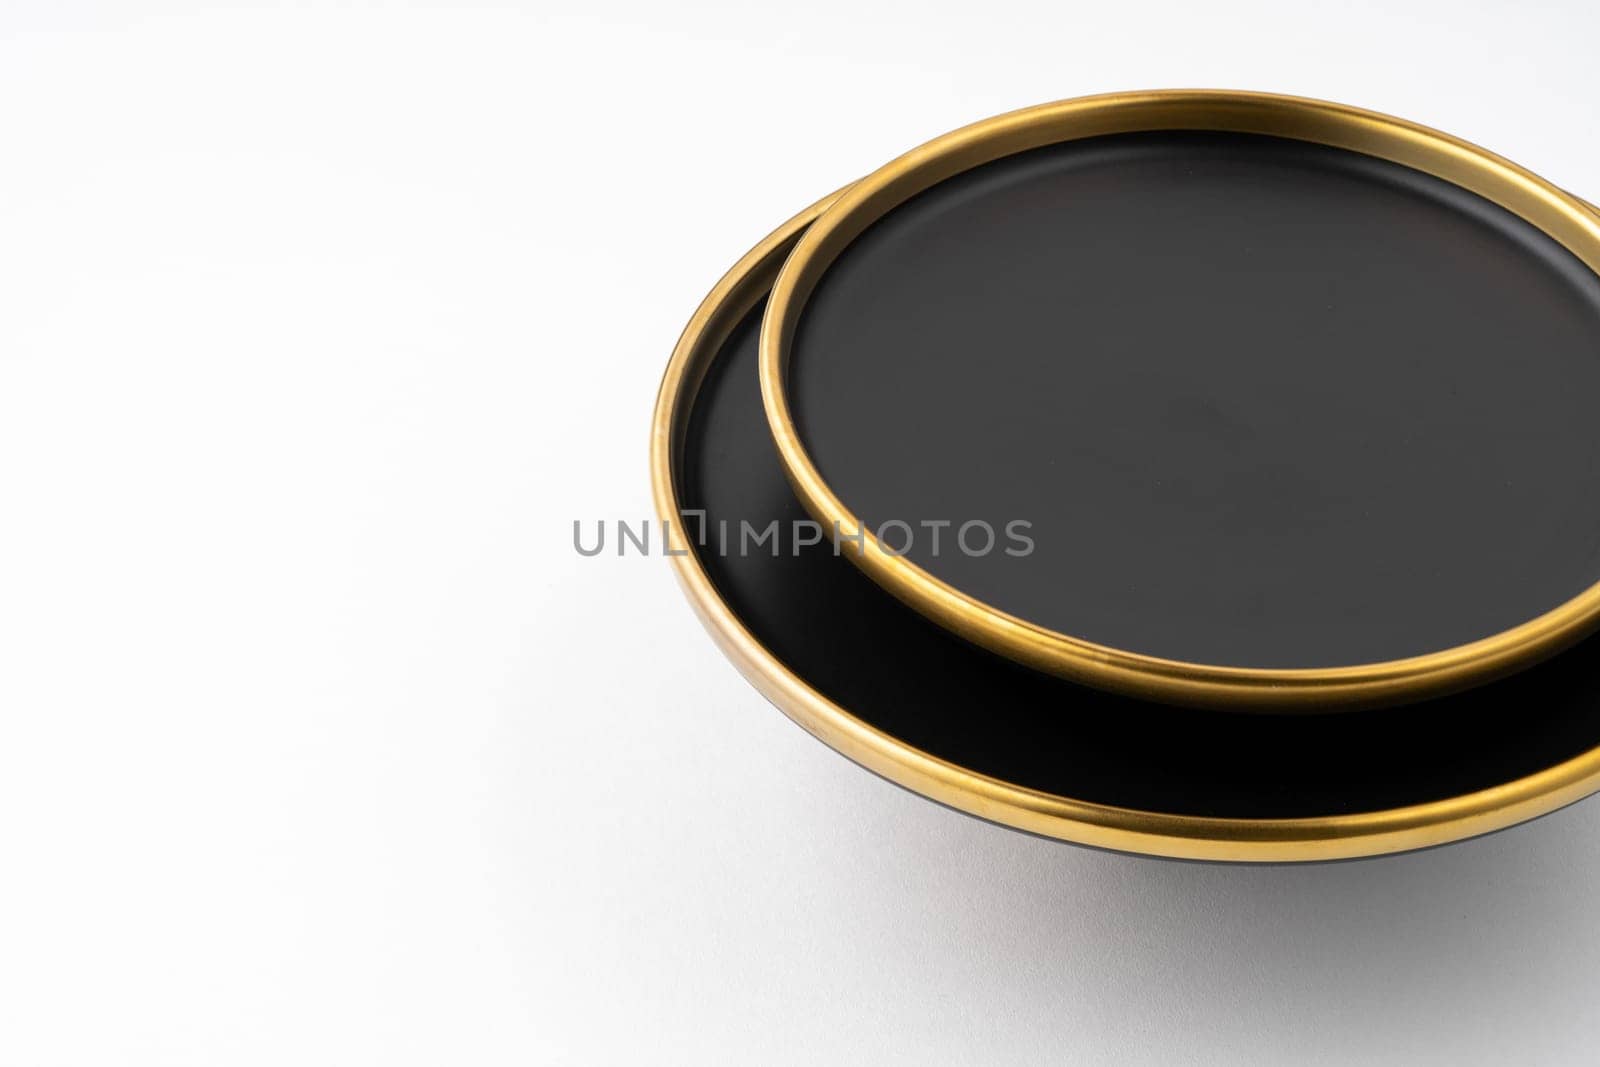 A set of black and golden ceramic plates on a white background